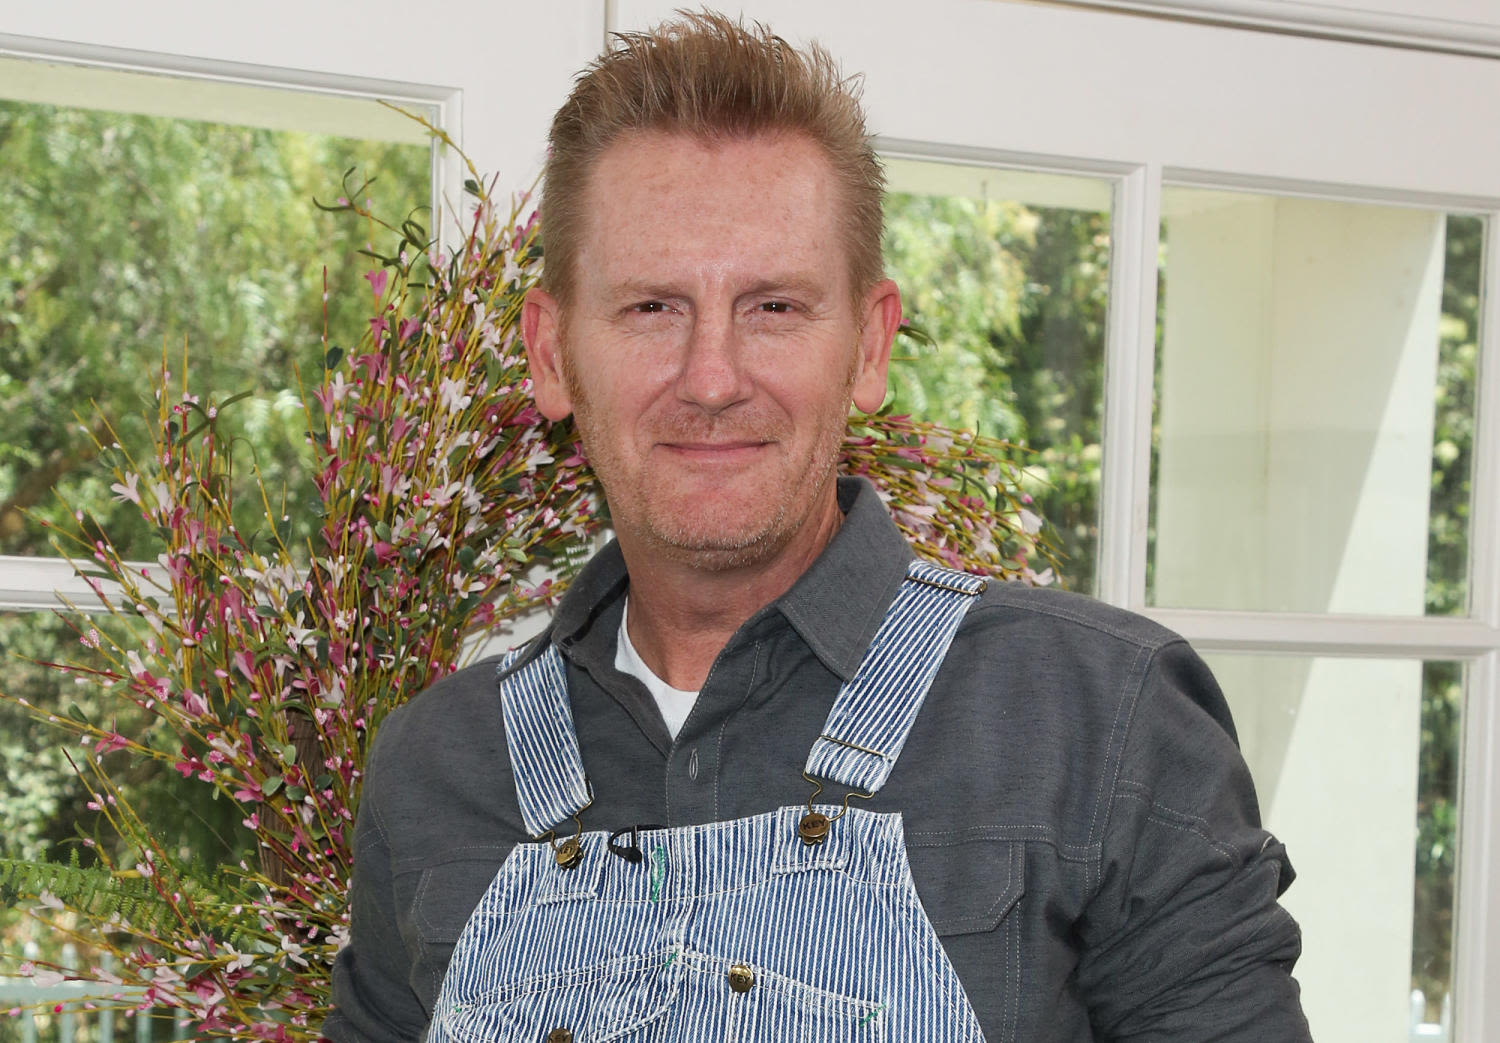 Singer Rory Feek remarries 8 years after losing wife and musical partner Joey